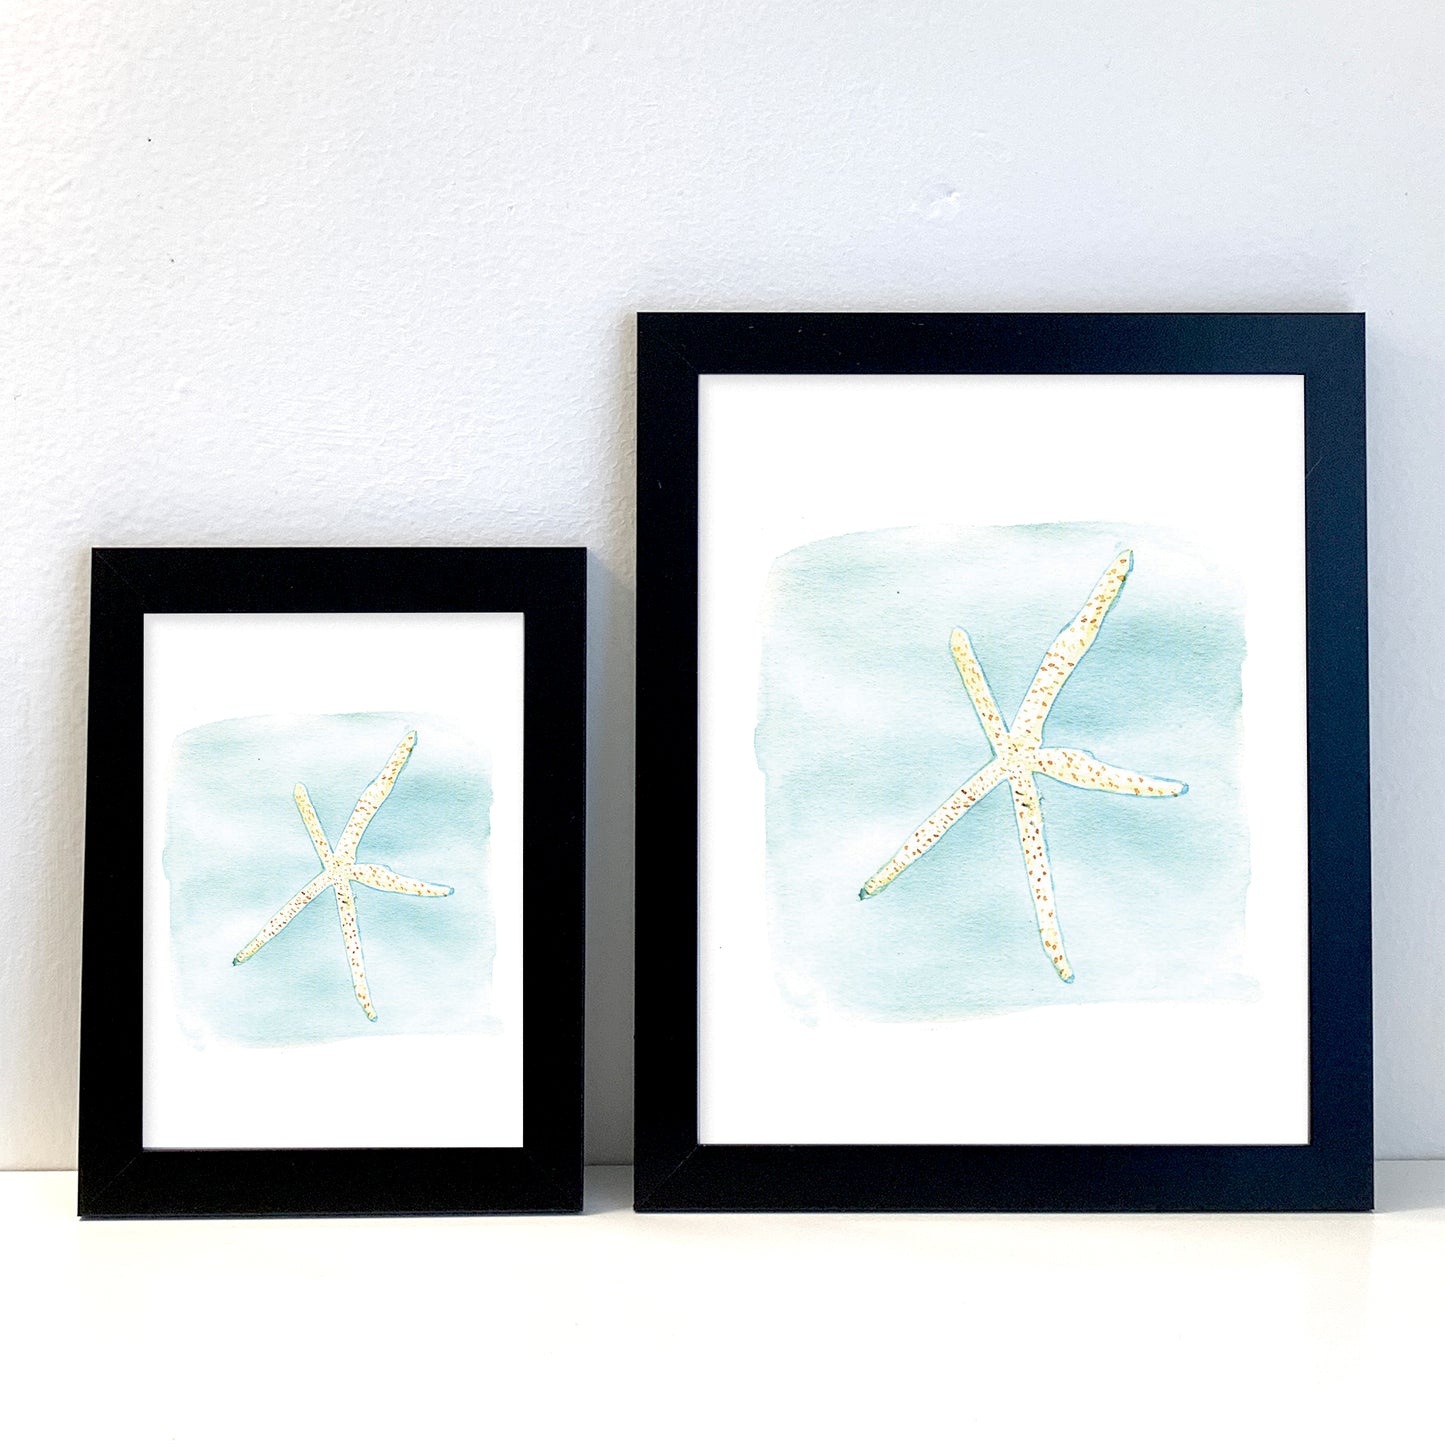 Brittle star Starfish original painting wall art print - Flamingo Shores - Original Art for Home Decor and Gifts